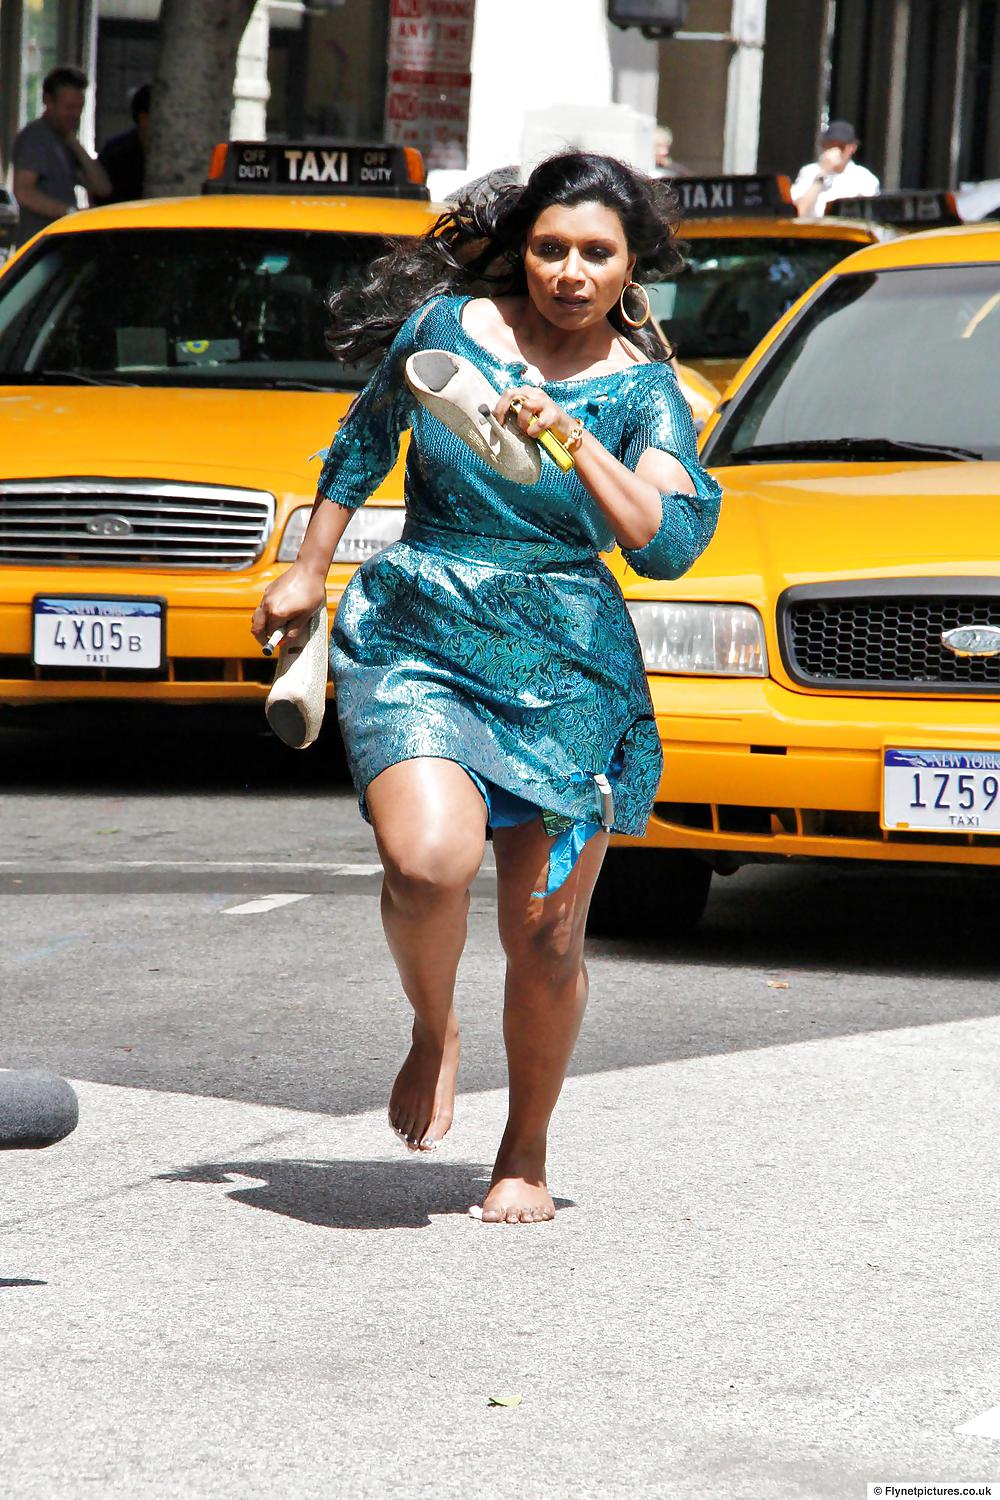 Hot Indian comedian Mindy Kaling - What would you do to her? #16251176